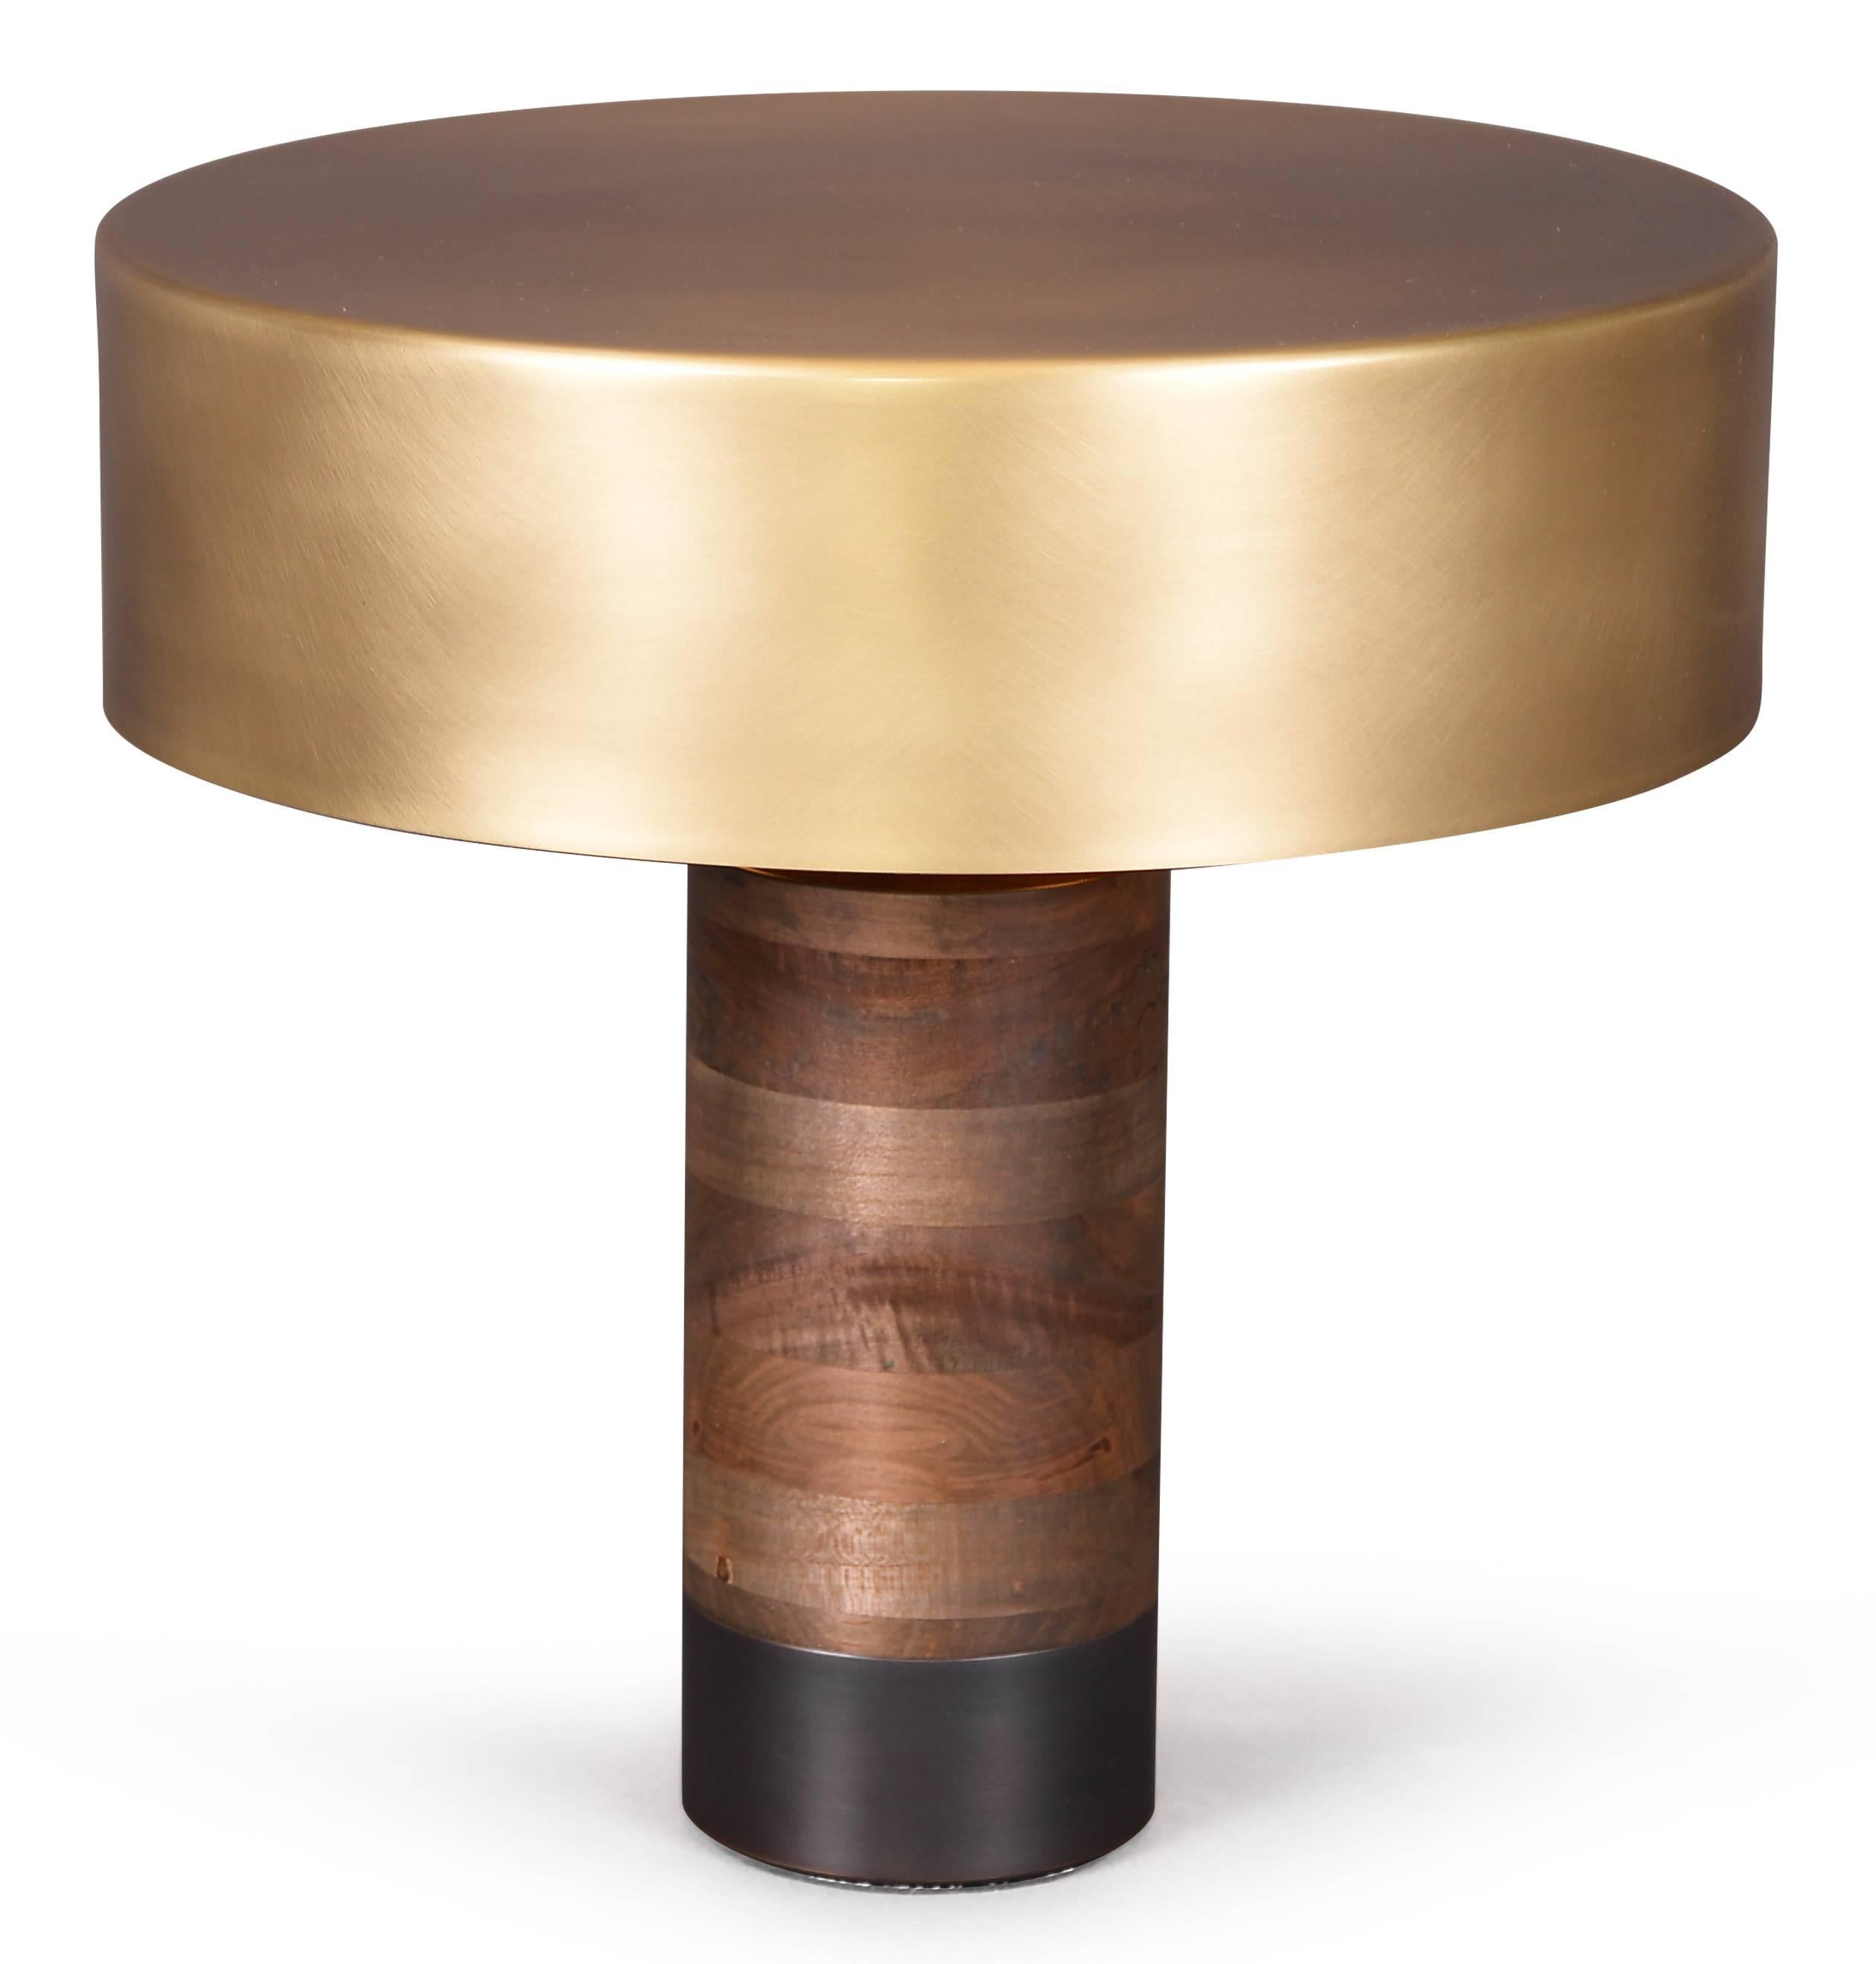 The sleek and striking Gotham lamp features oxidized ambrosia maple and bronze.

Dimensions as shown in images: D 14 in. / H 14 in.

Other Standard Size: 
Dimensions: D 14 in. / H 20 in.

